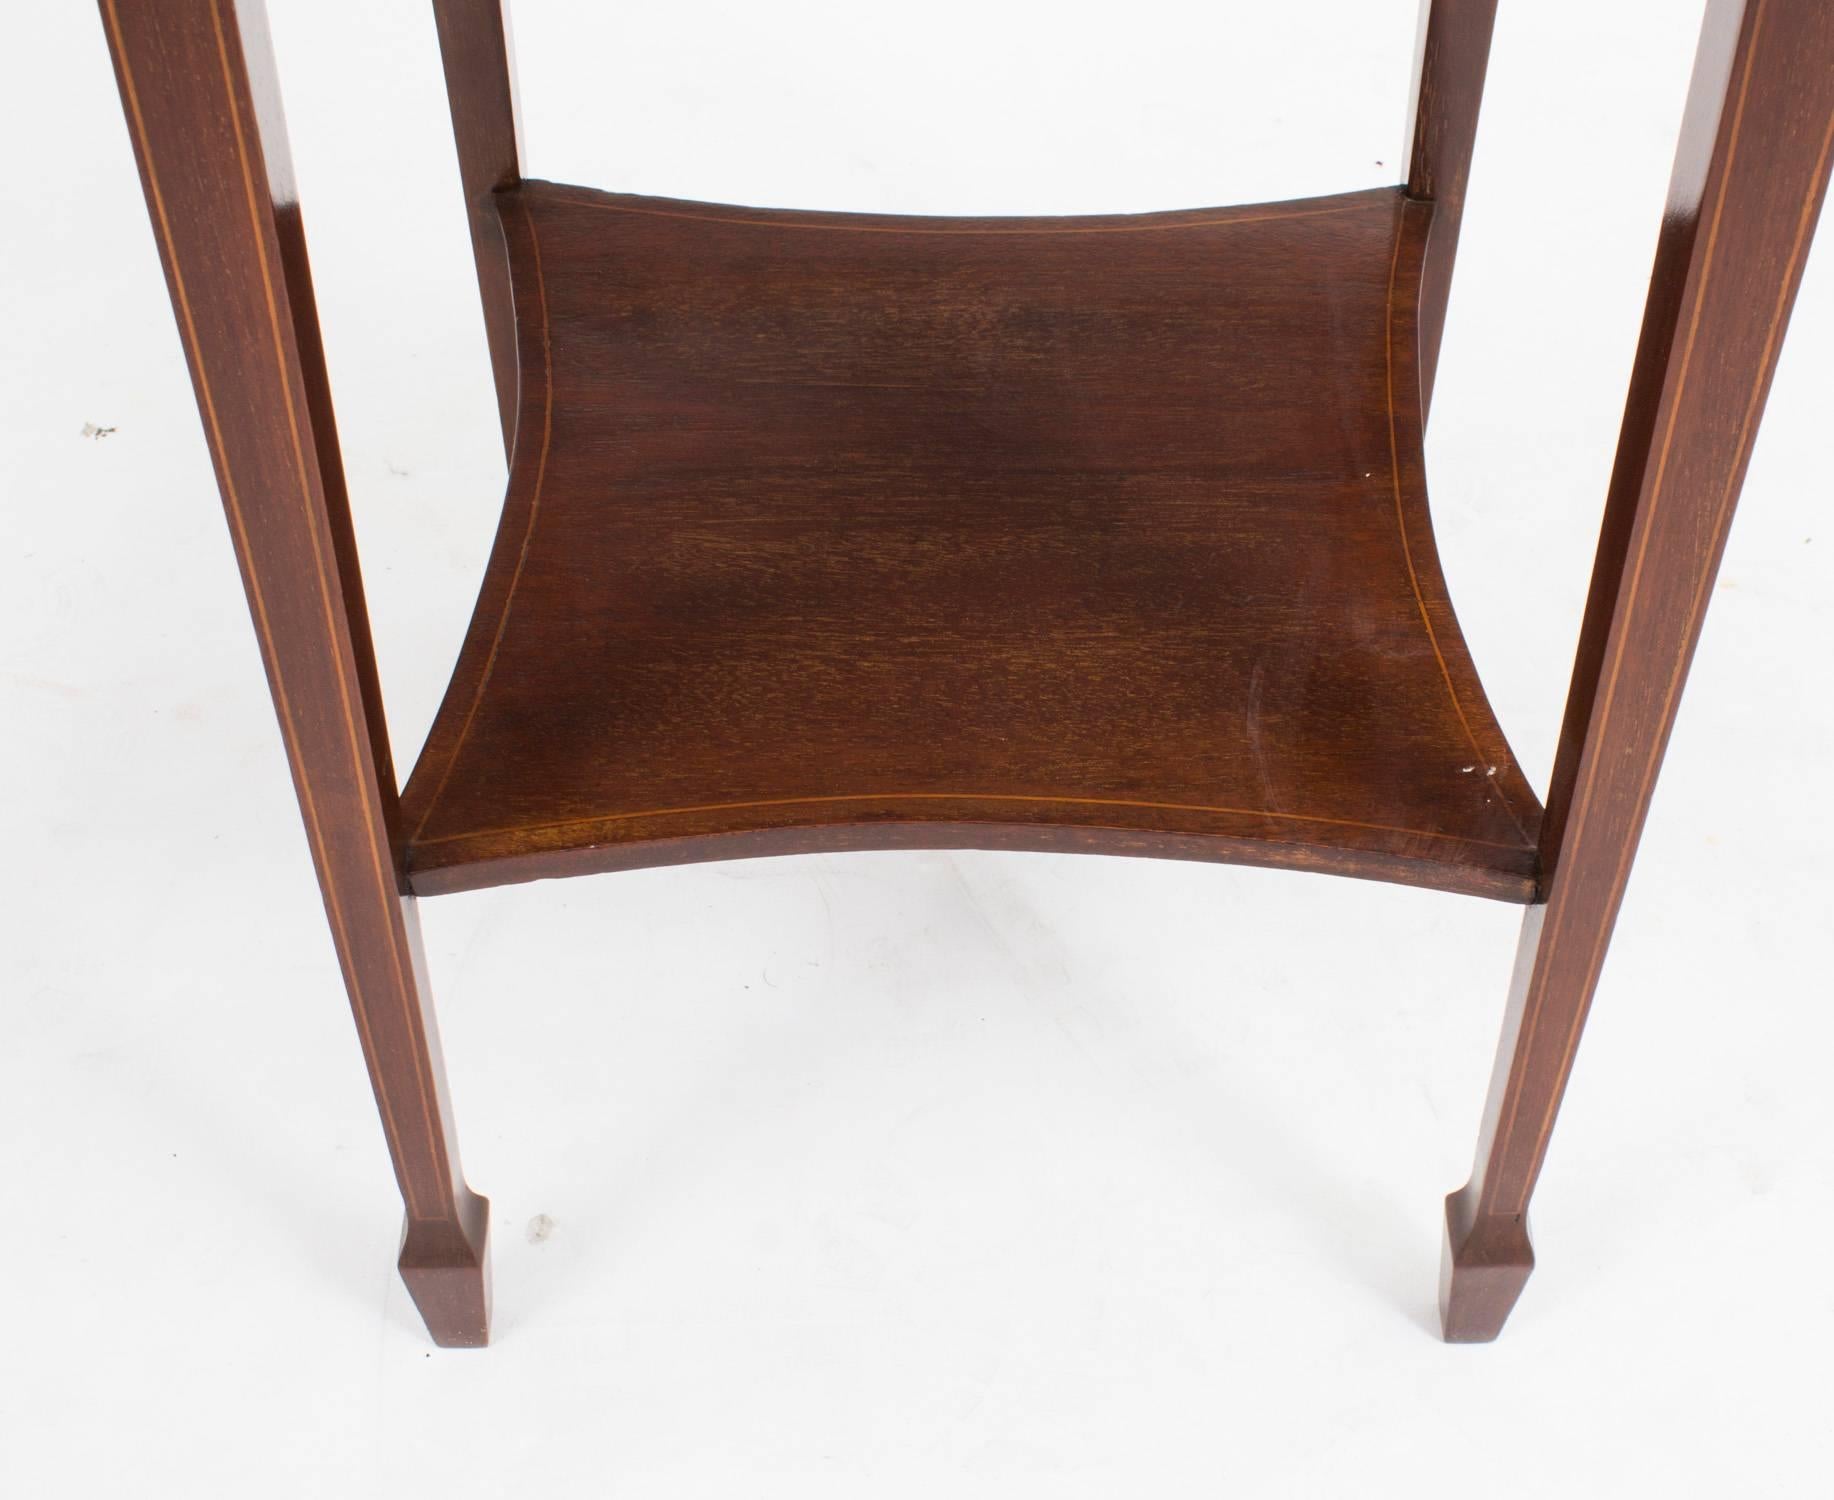 English Early 20th Century Inlaid Mahogany Edwardian Occasional Table For Sale